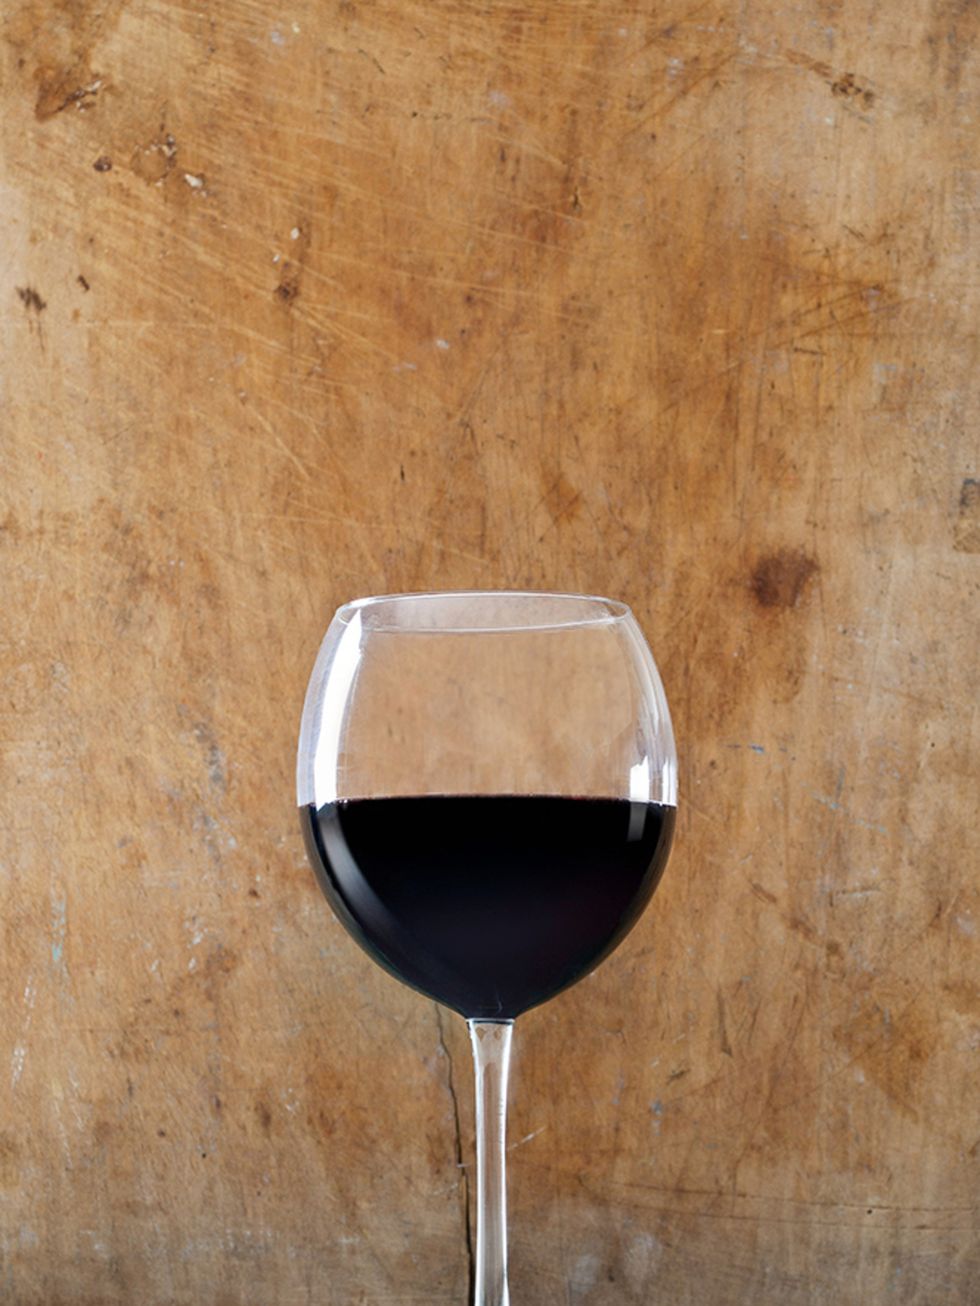 <p><strong>Where: Eating out / dinner party</strong></p>

<p><strong>Wine:</strong> If you're out opt for red wine (it has slightly less sugar than white). <br />
Tempranillo red grapeswhich are used to make certain red wines like Riojamay lower cholest